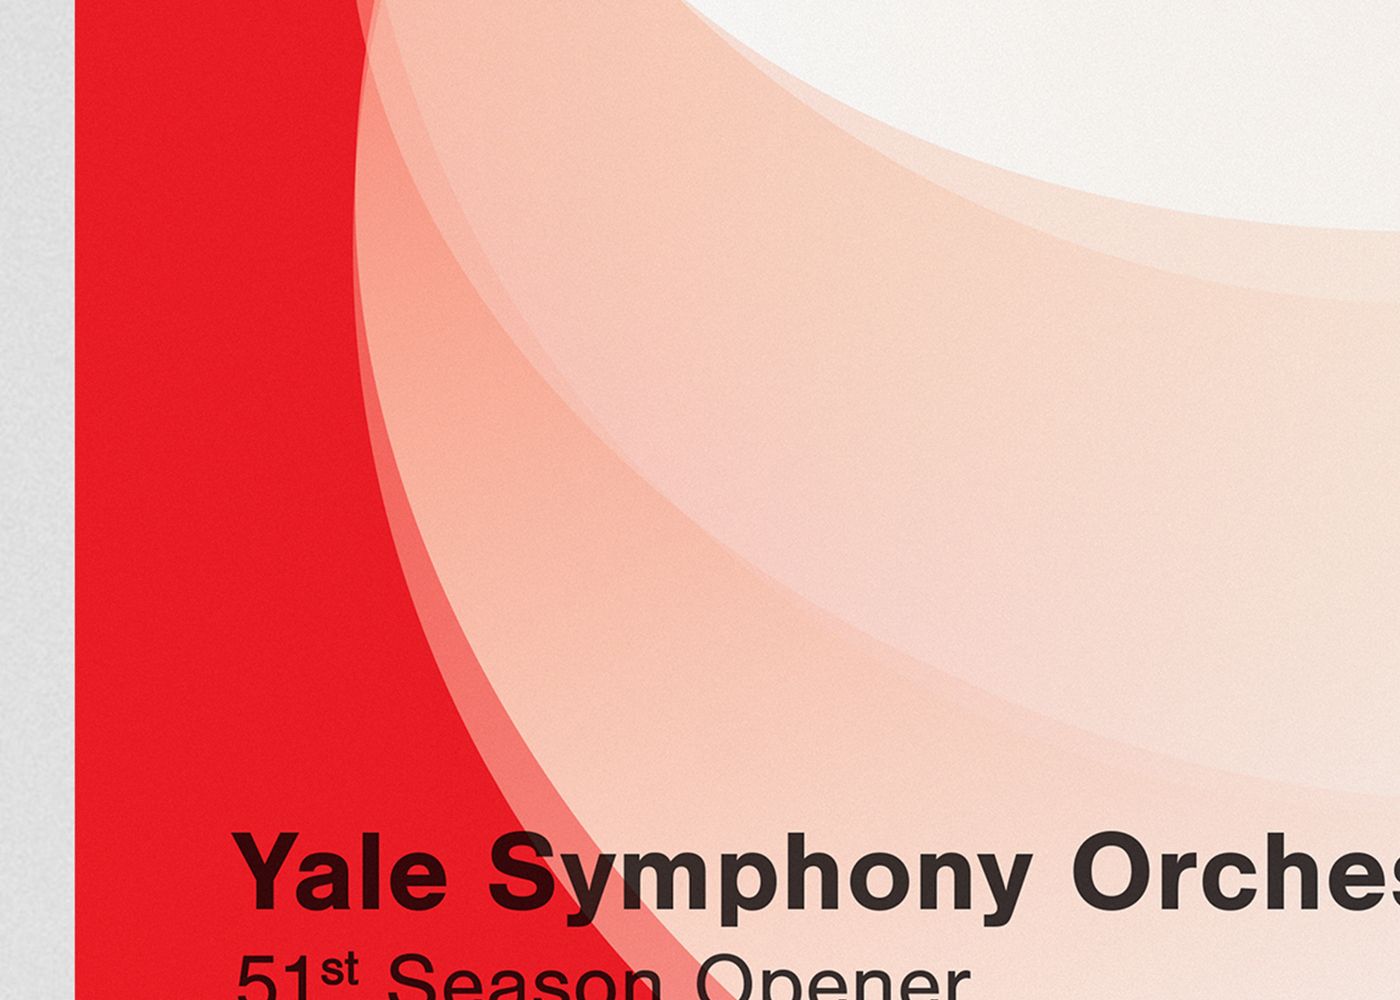 Detail of the poster for the Opening Concert of the 51st Season